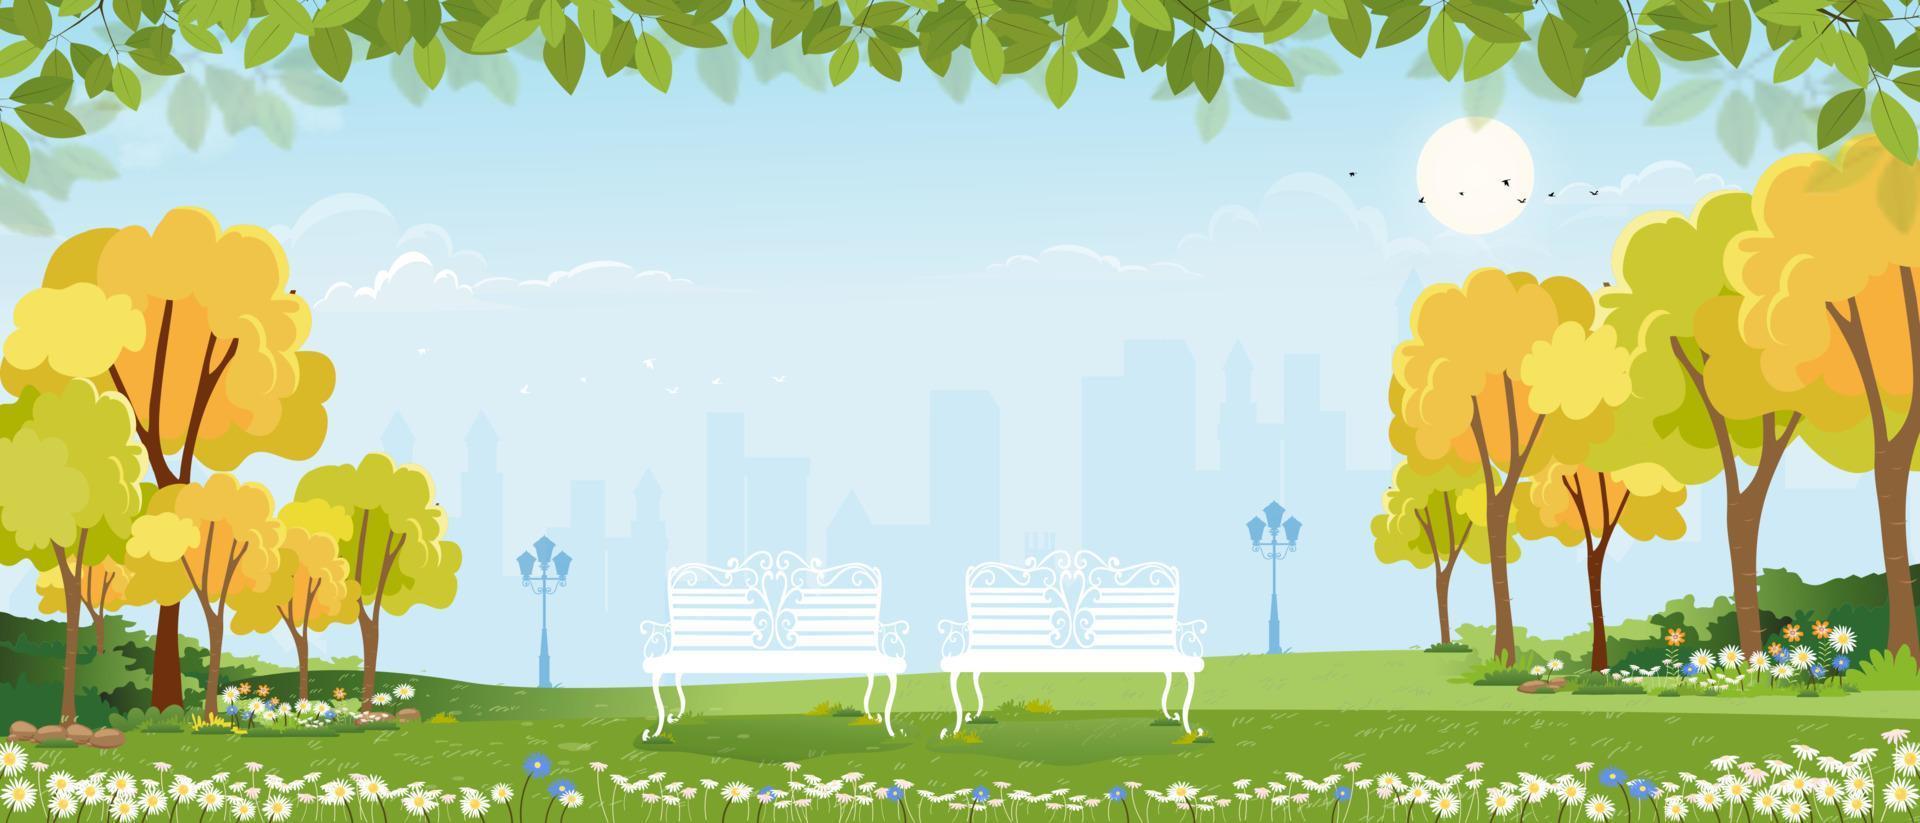 Spring landscape at city park in the morning, Natural public park with flowers blooming in the garden, Peaceful scene of green fields with blurry cityscape building, cloudy and sun on summer vector